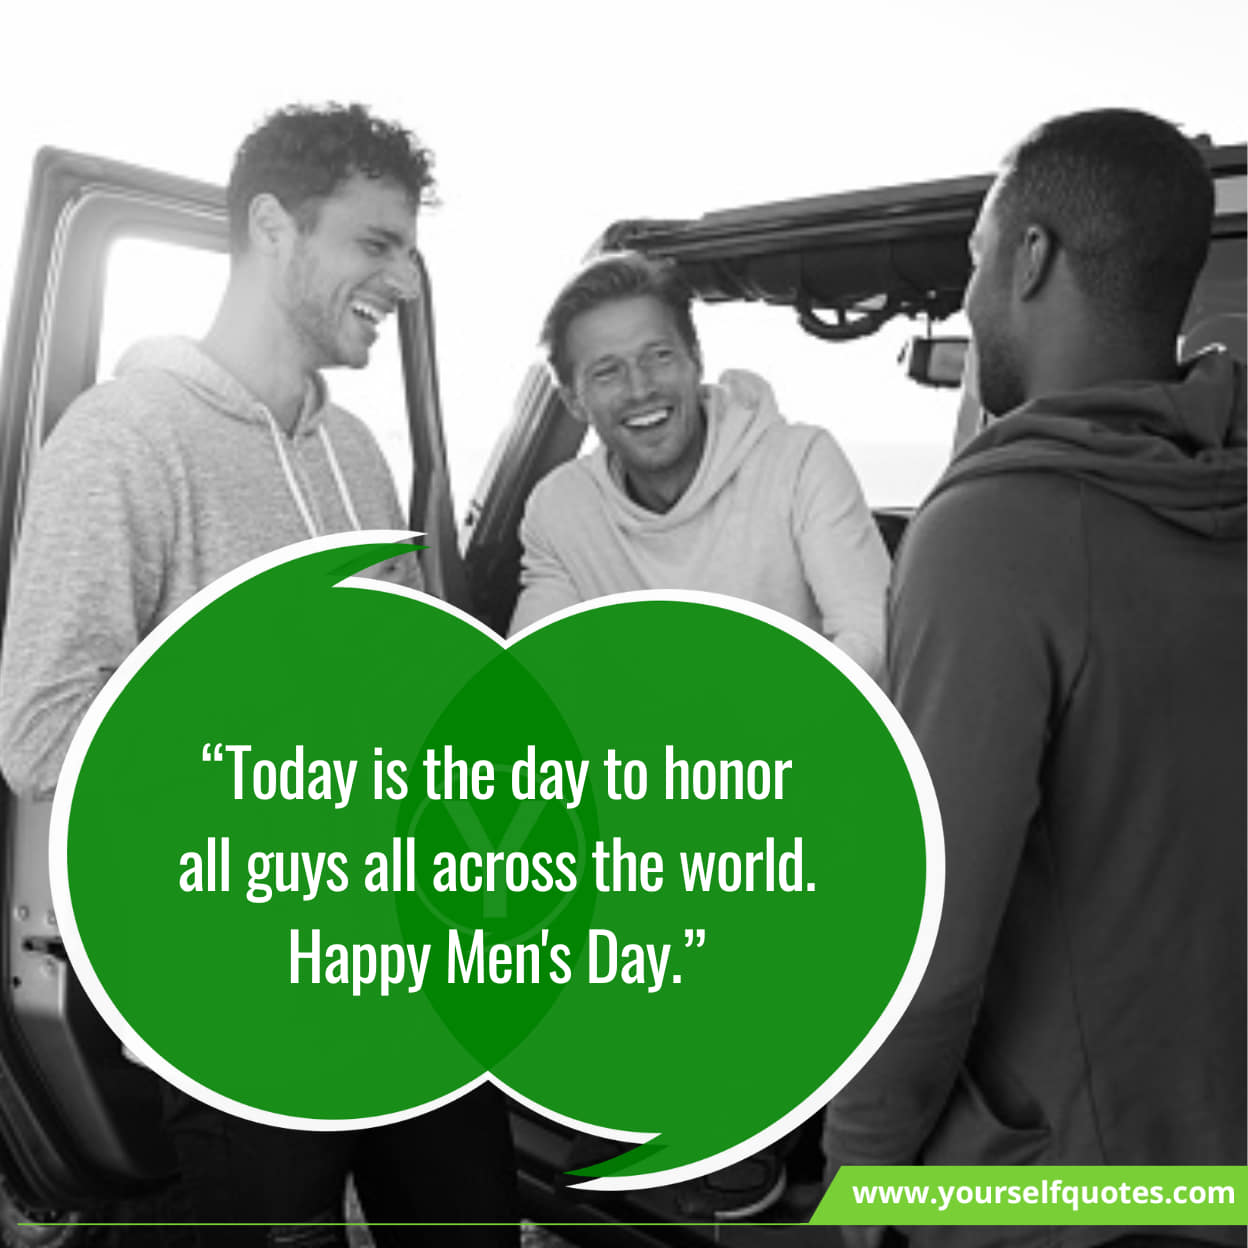 Happy Men’s Day Wishes, Quotes & Messages